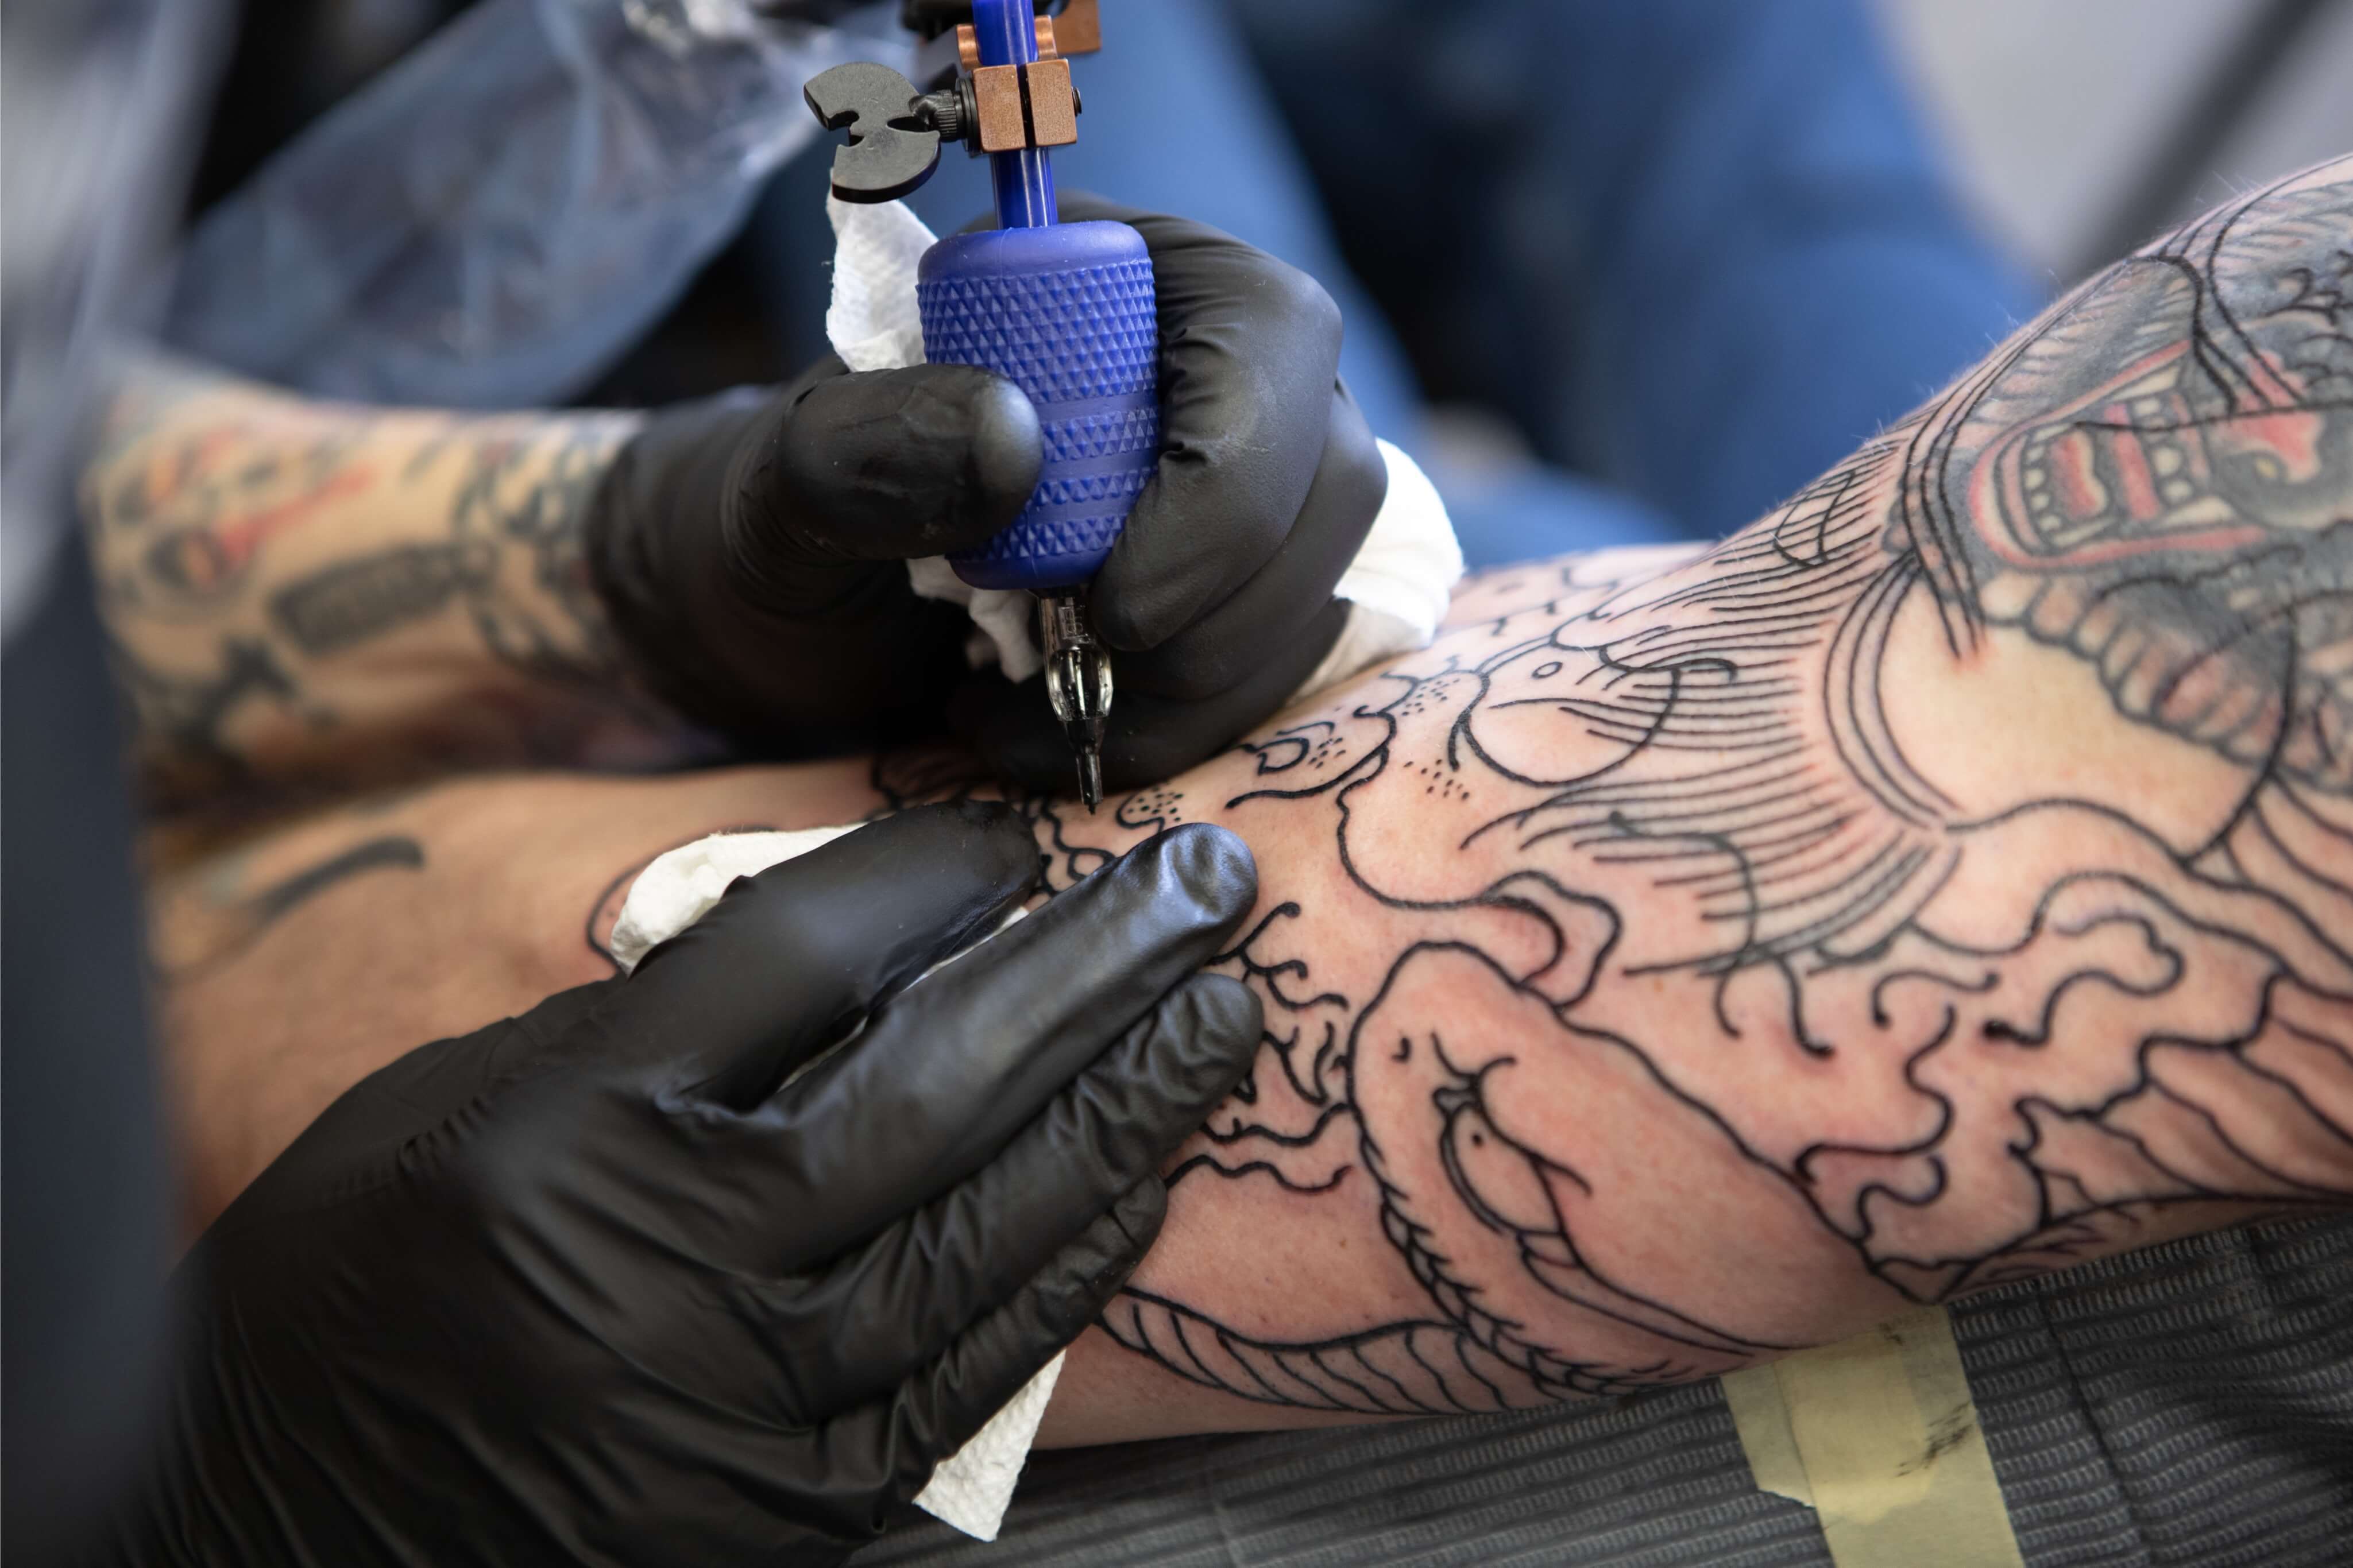 Tattoo Cover Up Ideas to Fix Your Ink – NAAMA Studios